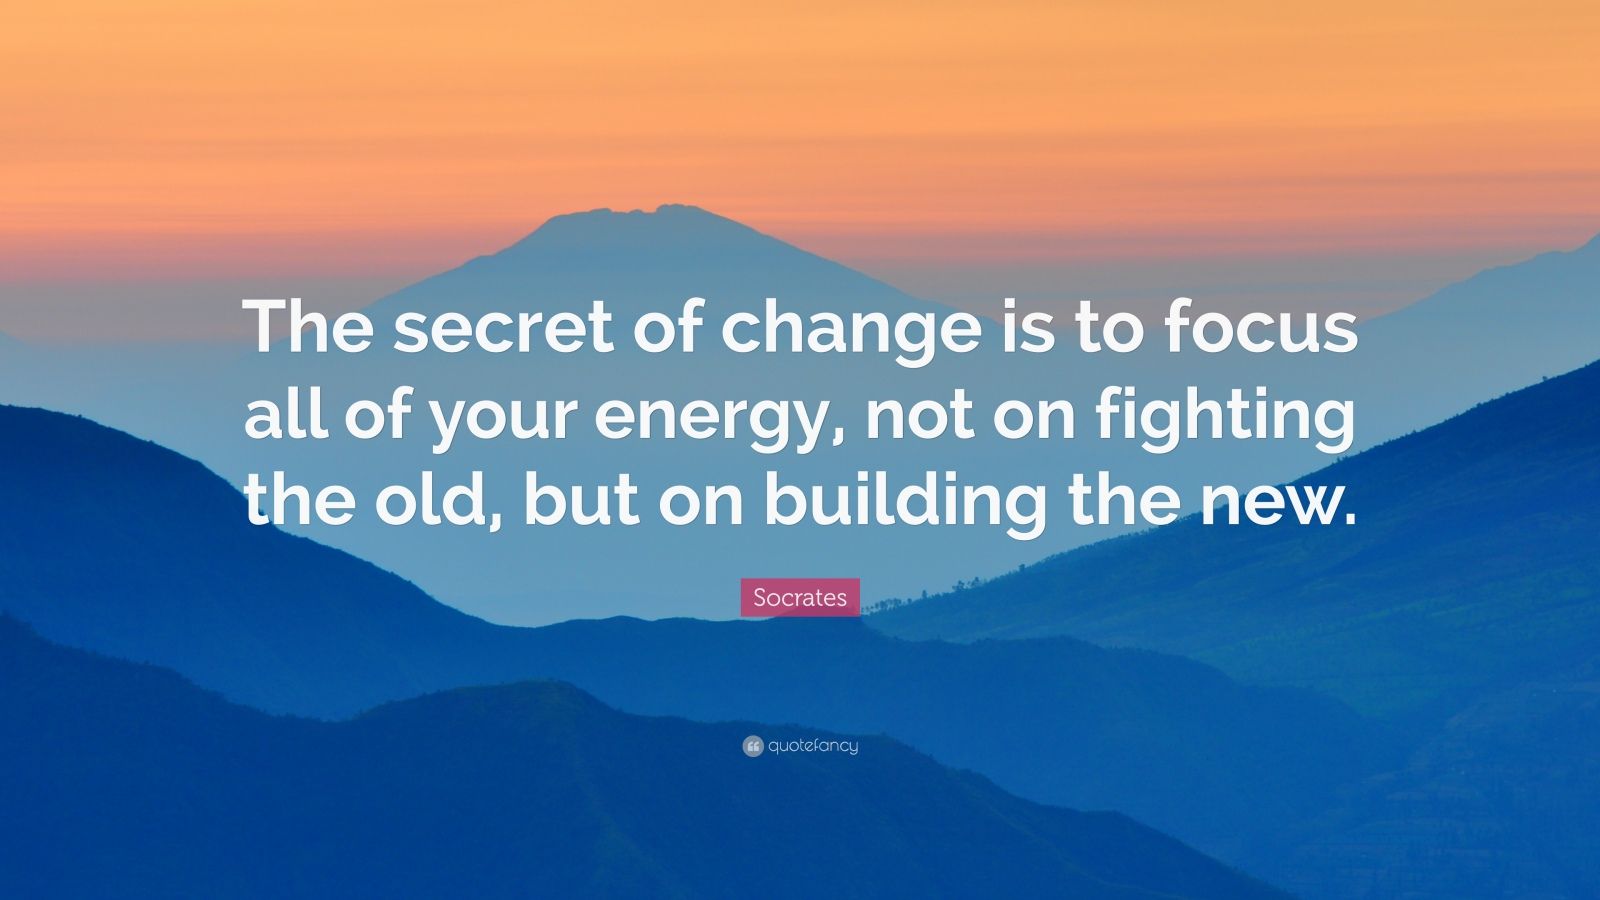 1701519 Socrates Quote The secret of change is to focus all of your energy